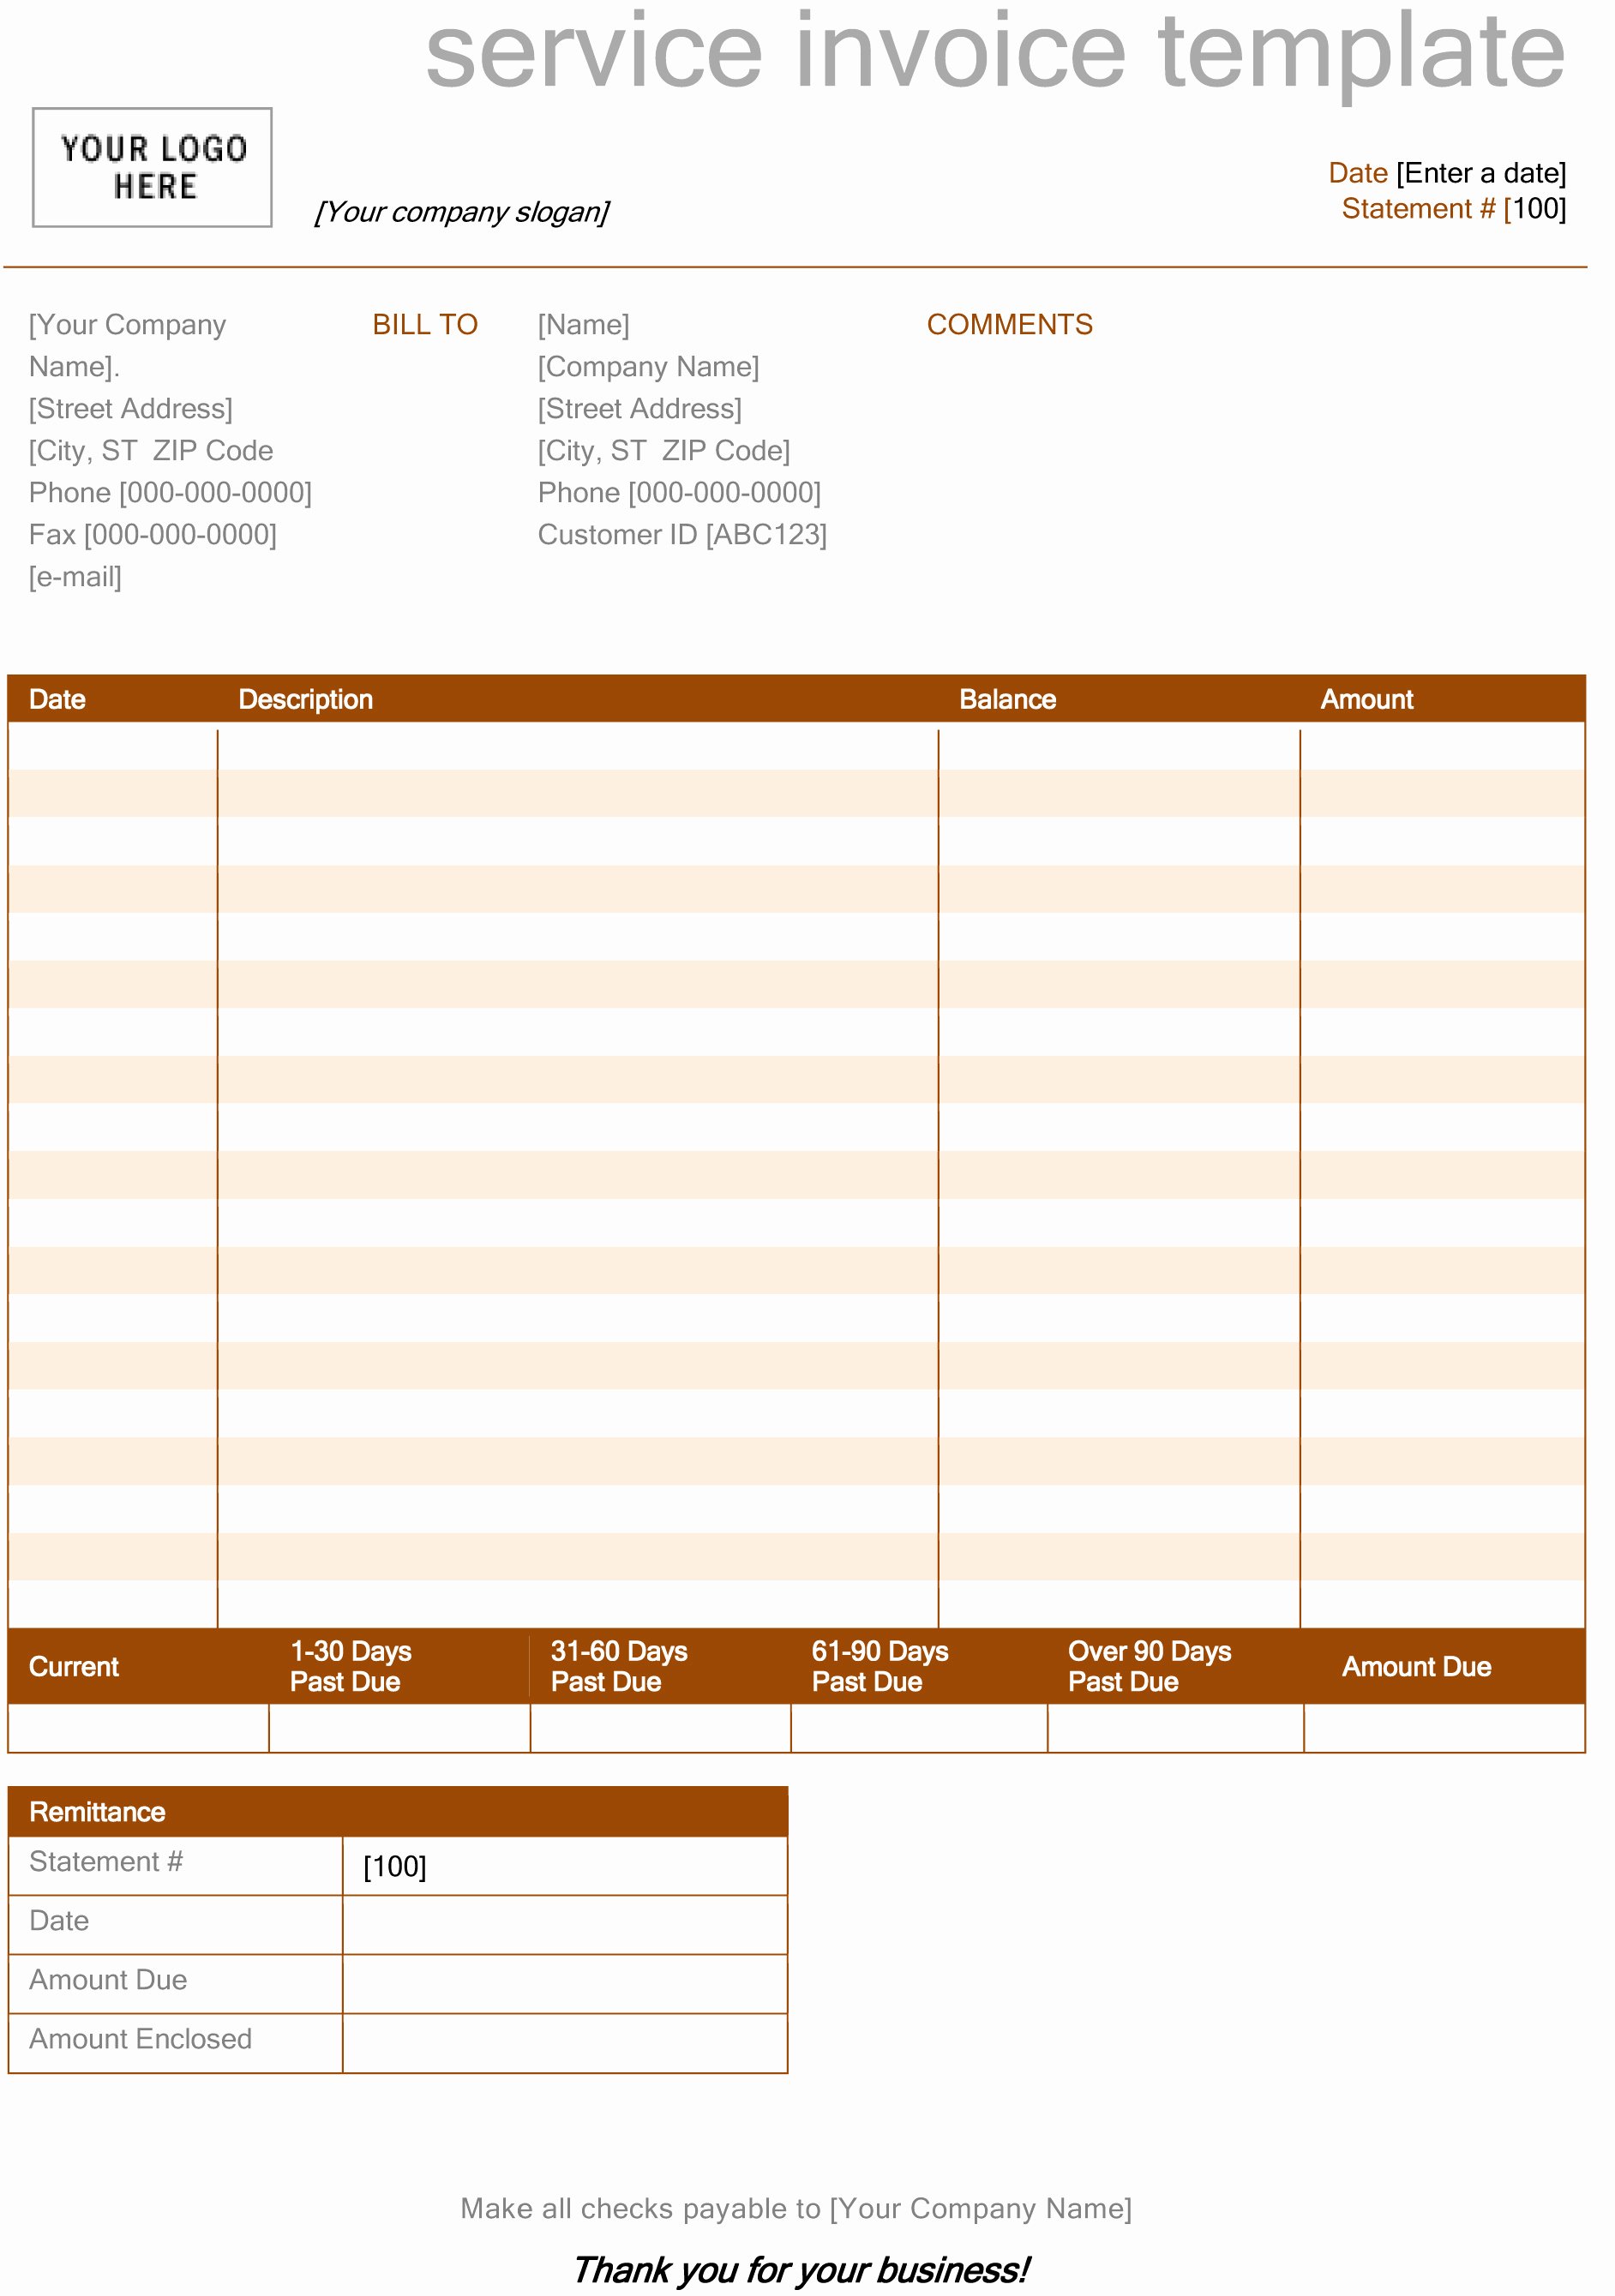 Best S Of Service Invoice Template Word Excel